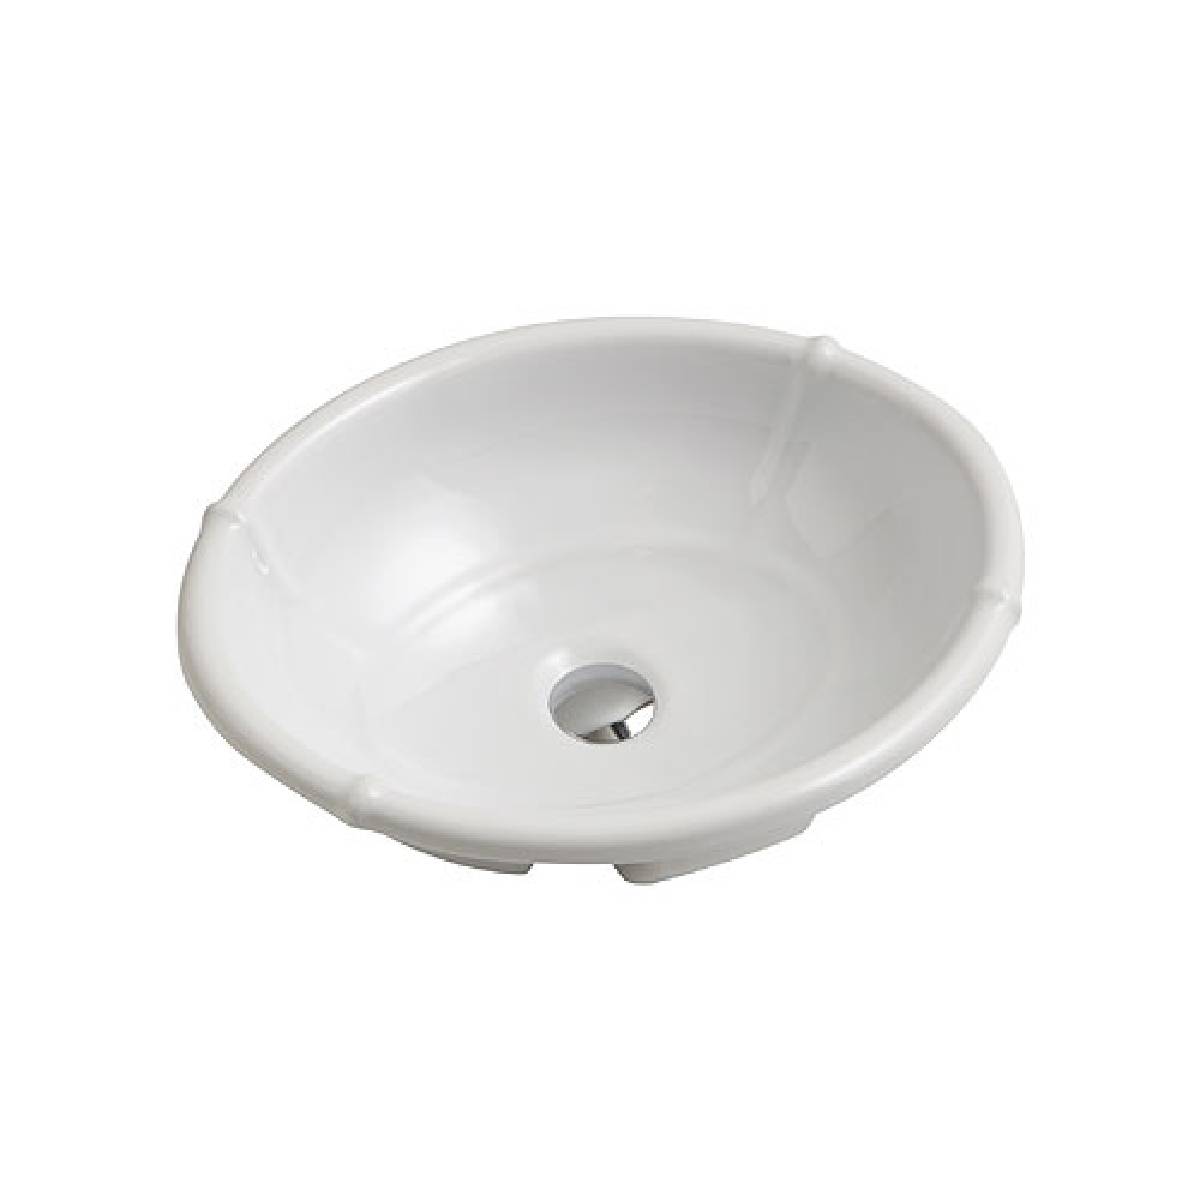 Olympia Impero 490mm Counter Top Basin (1374)